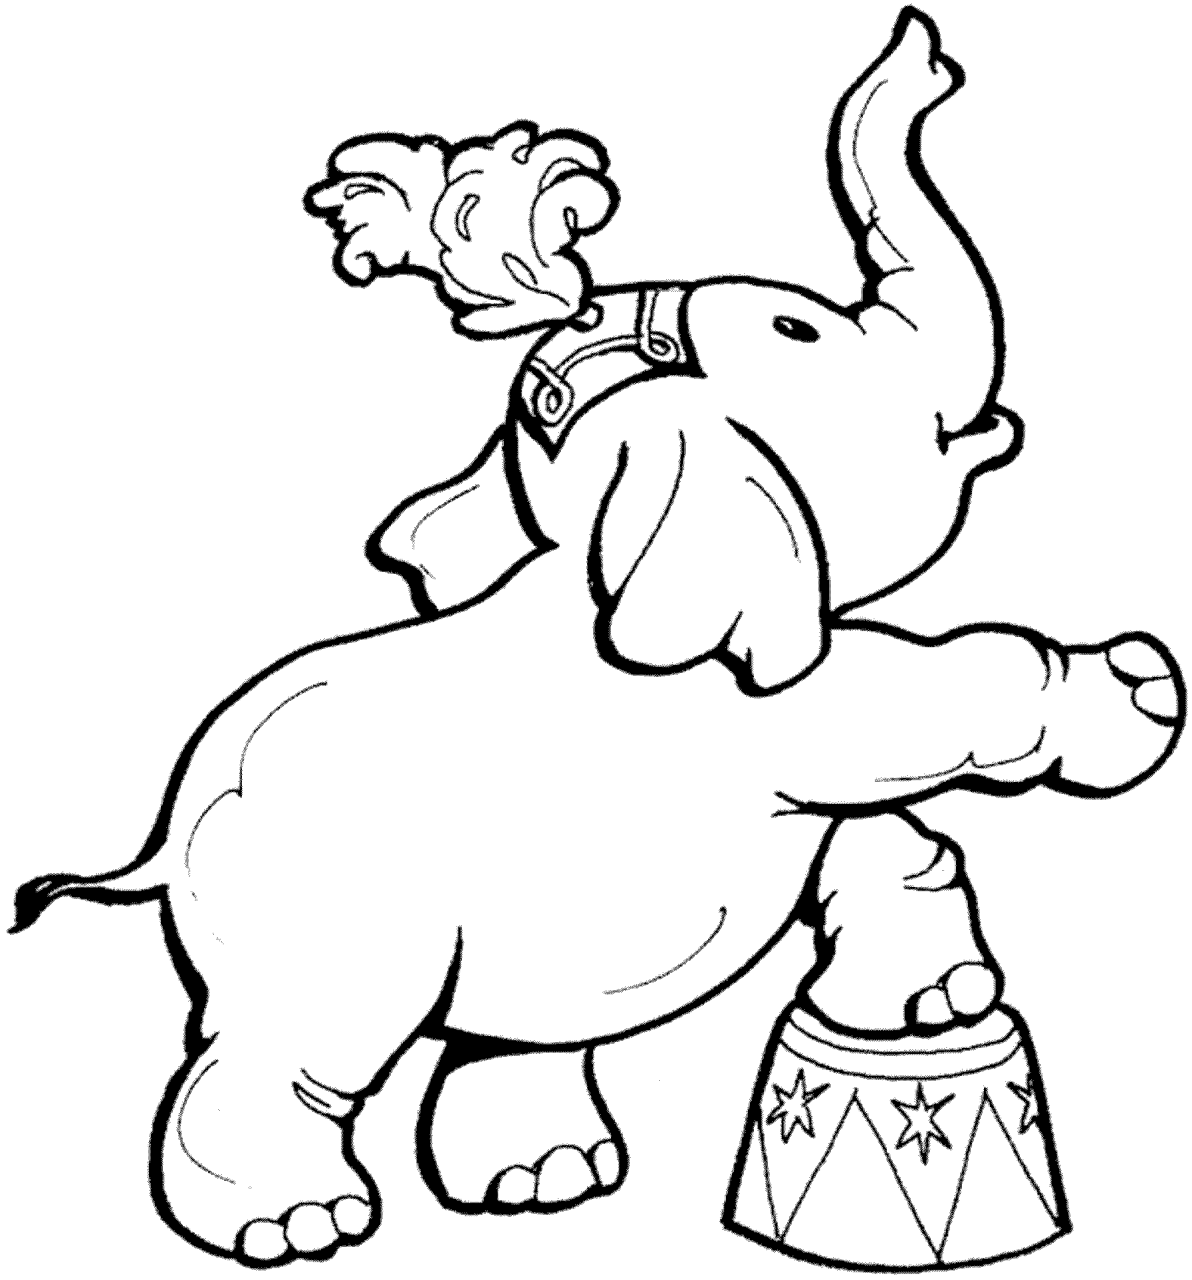 Coloring Pages Elephant